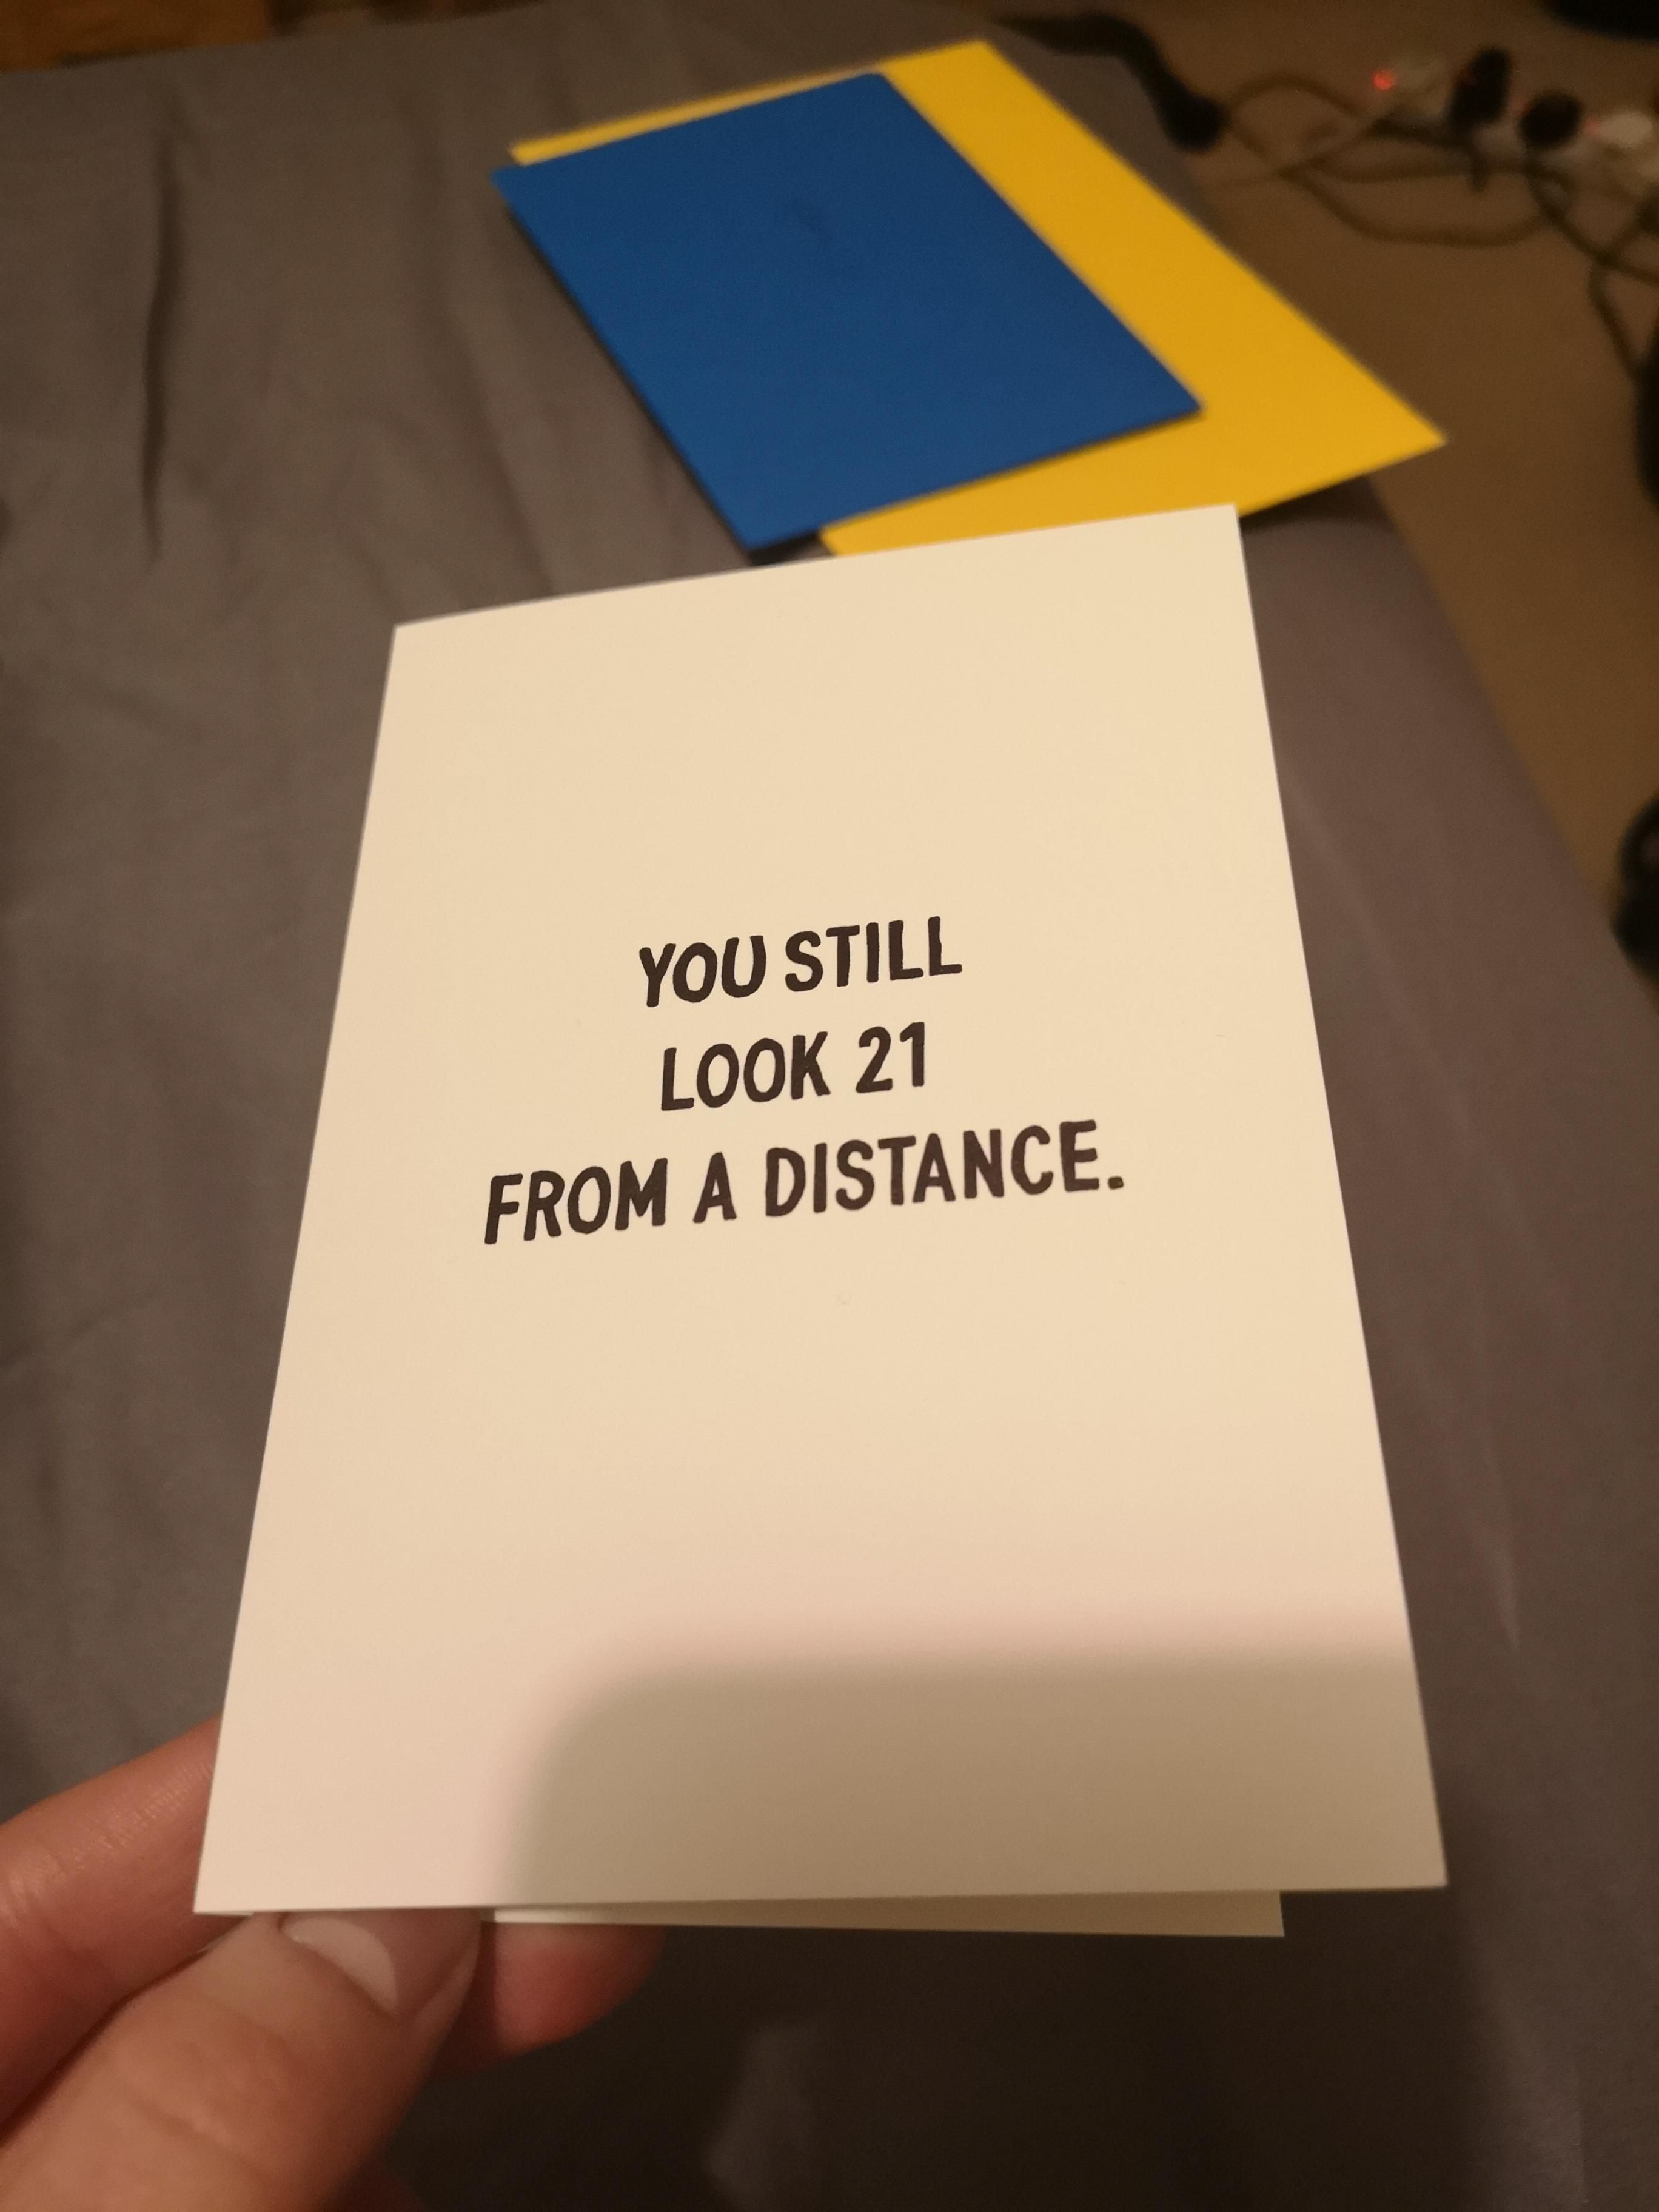 Its my birthday today and I got this card. I'm 22.